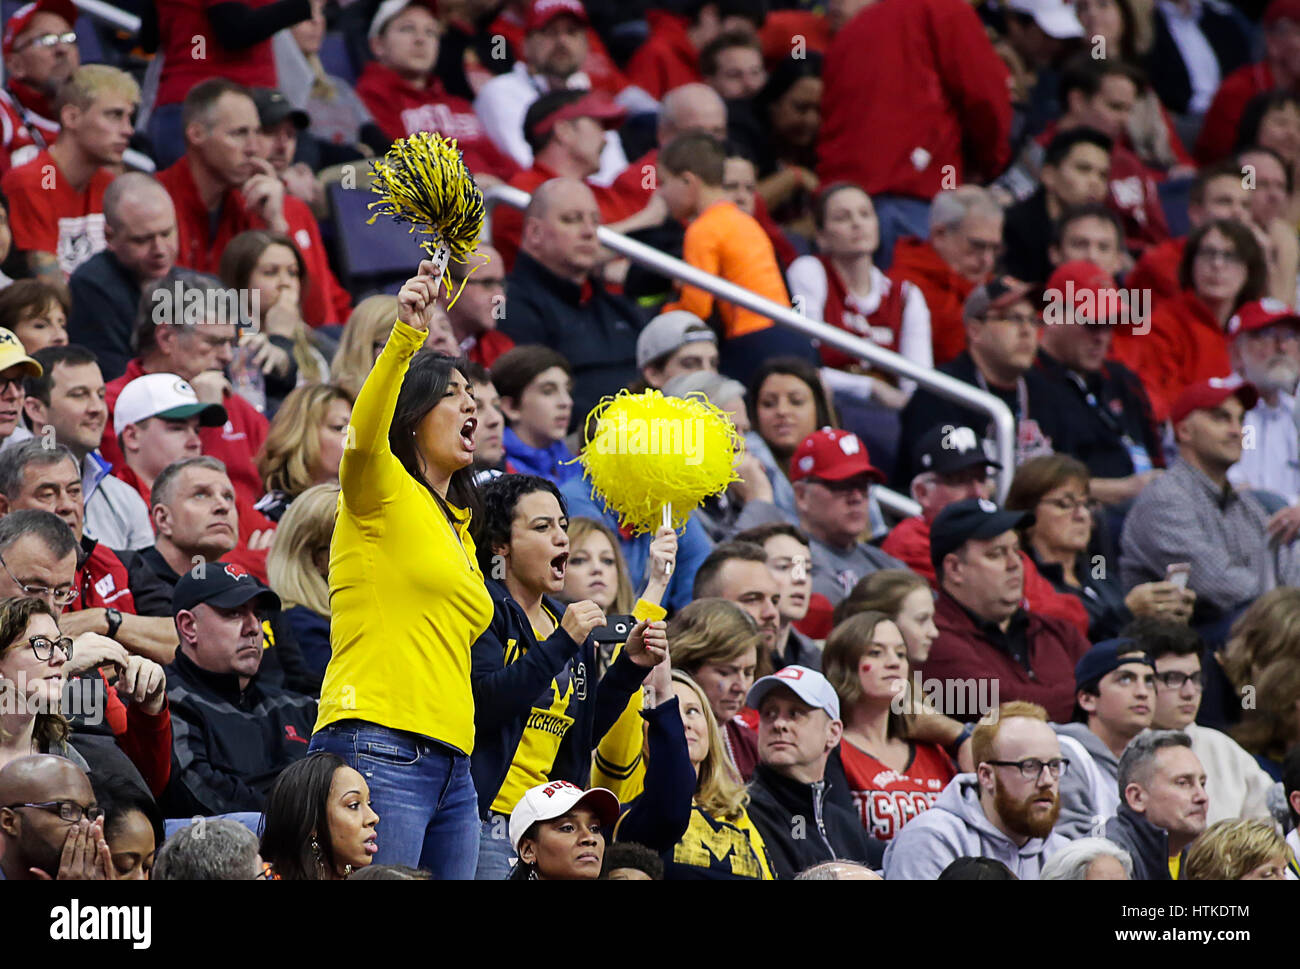 Washington, DC, USA. 12th Mar, 2017. Michigan fans cheer on their team in a sea of red during the Big 10 Men's Basketball Tournament championship game between the Wisconsin Badgers and the Michigan Wolverines at the Verizon Center in Washington, DC. Michigan wins the Big Ten Tournament defeating Wisconsin, 71-56. Justin Cooper/CSM/Alamy Live News Stock Photo